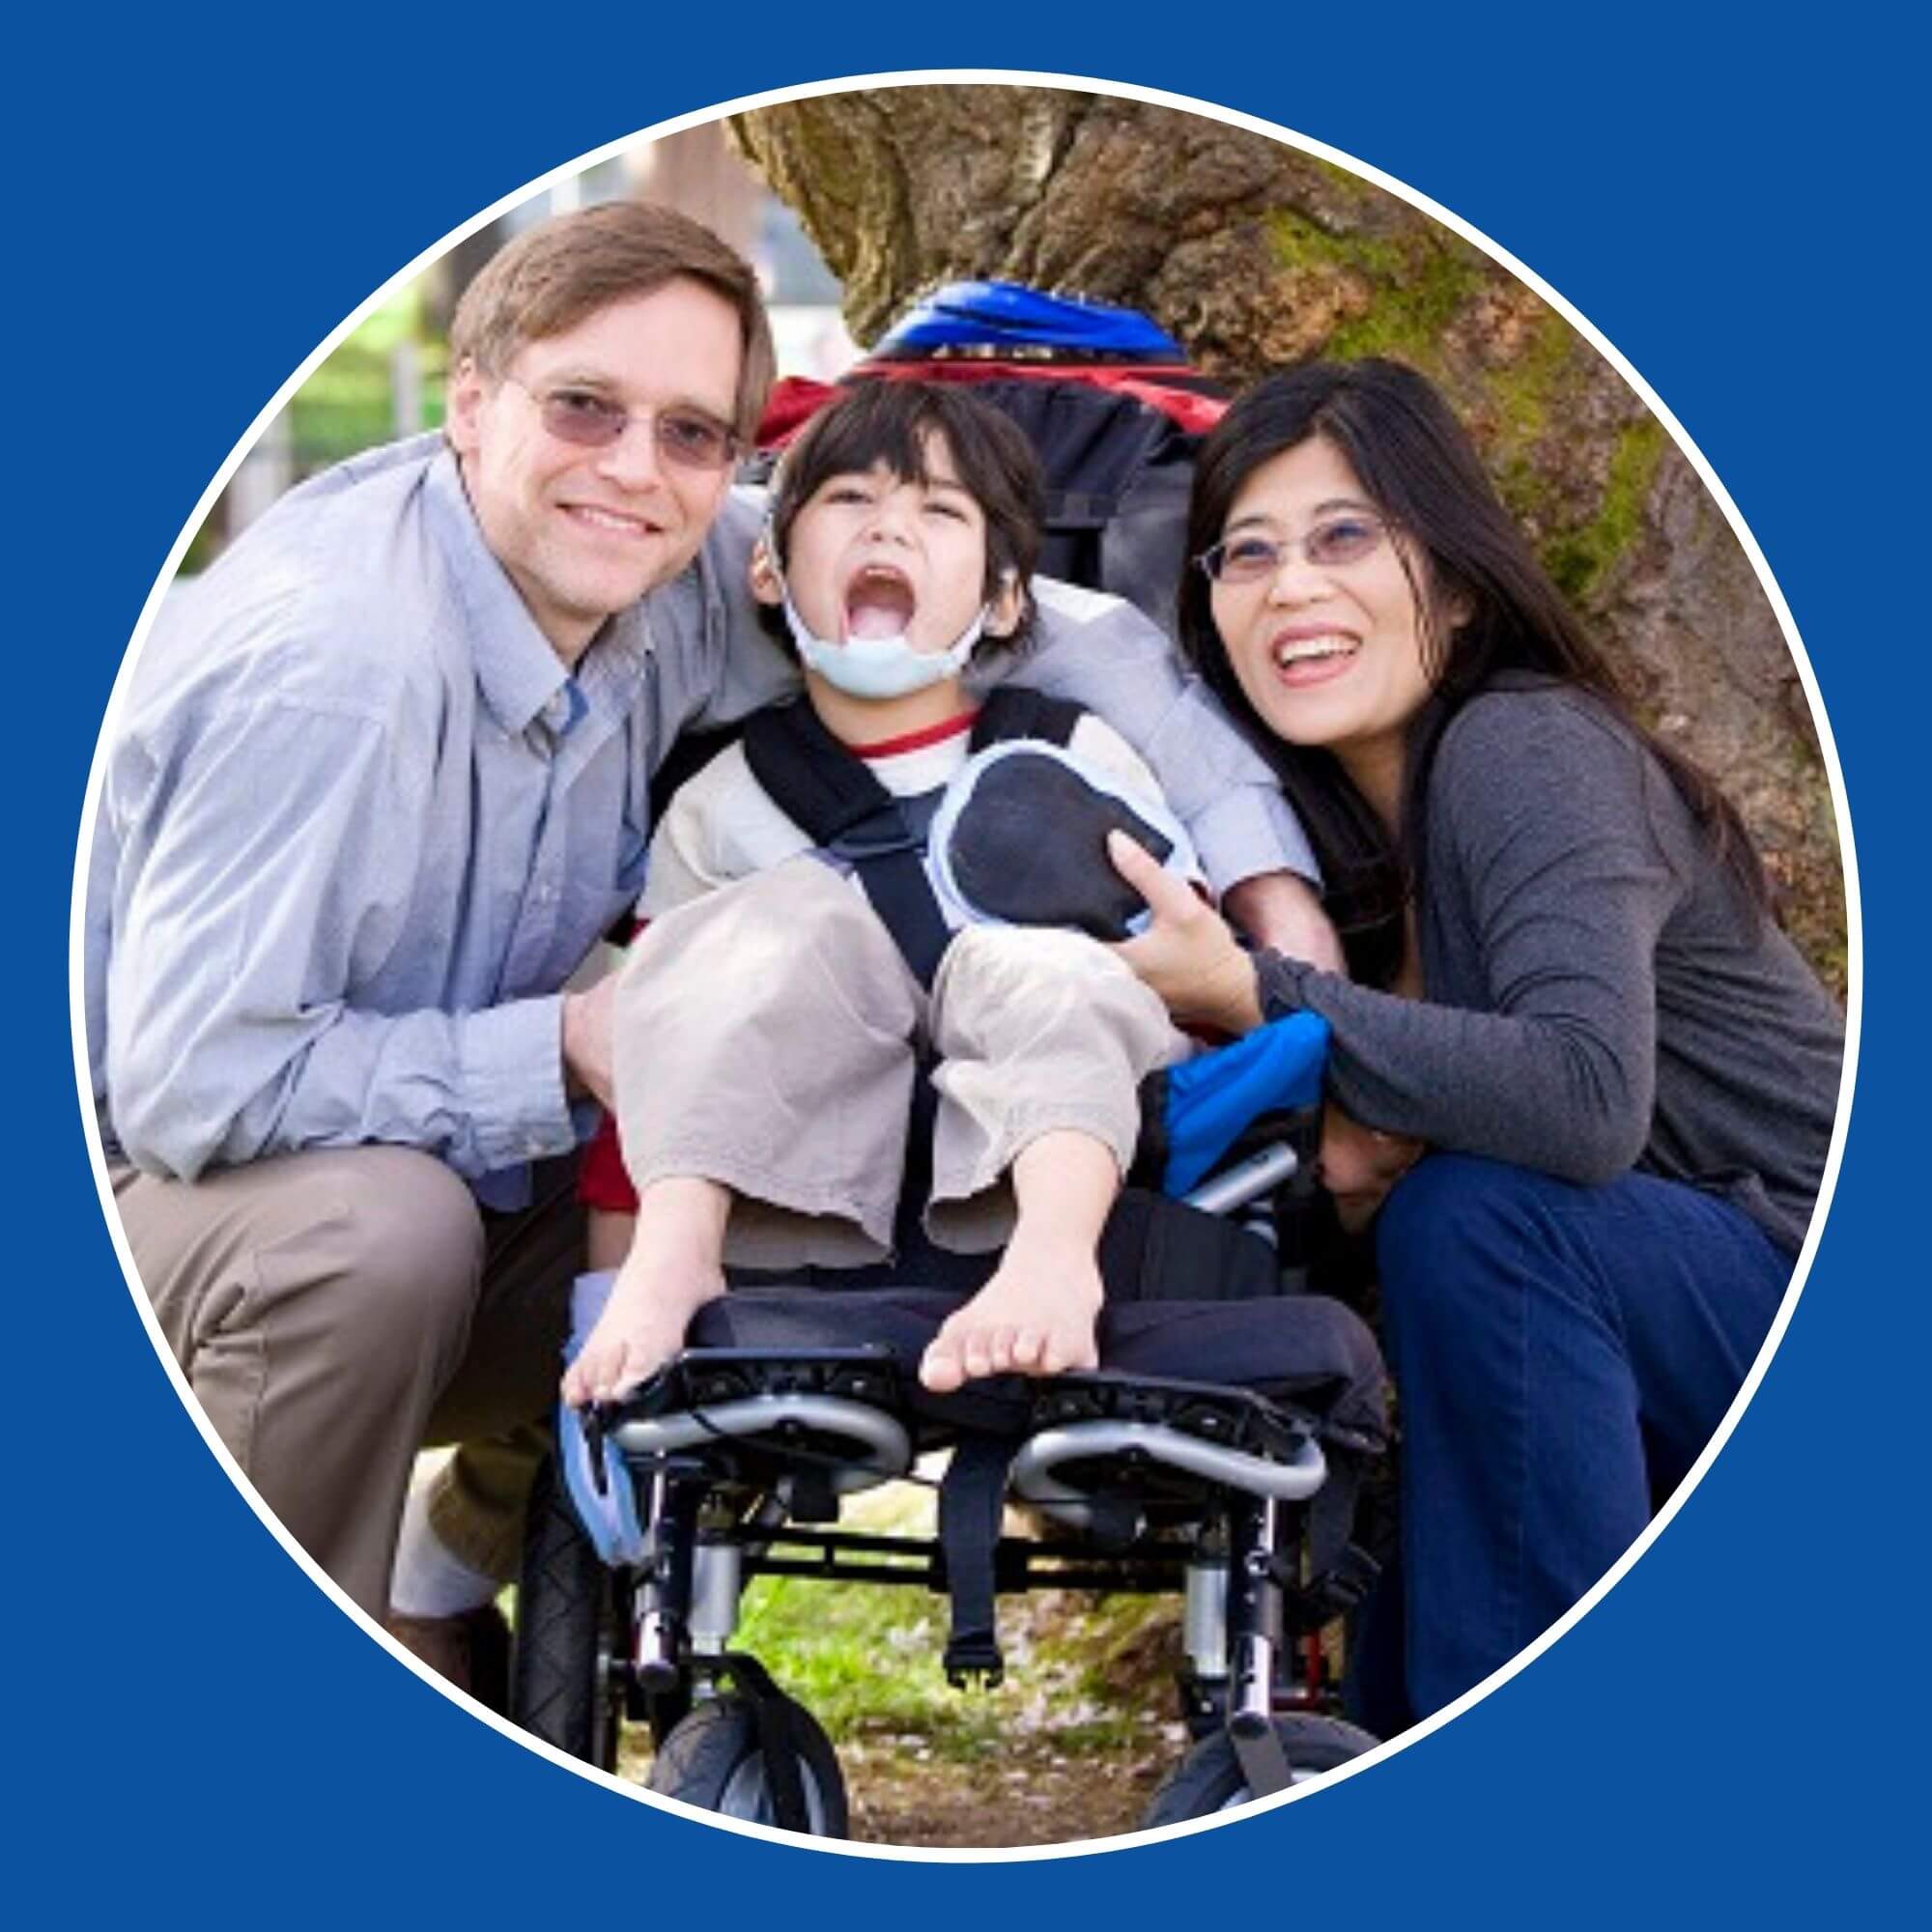 A photo of a Mum and Dad with their son who is in a wheelchair, out in the fresh air together next to a tree.